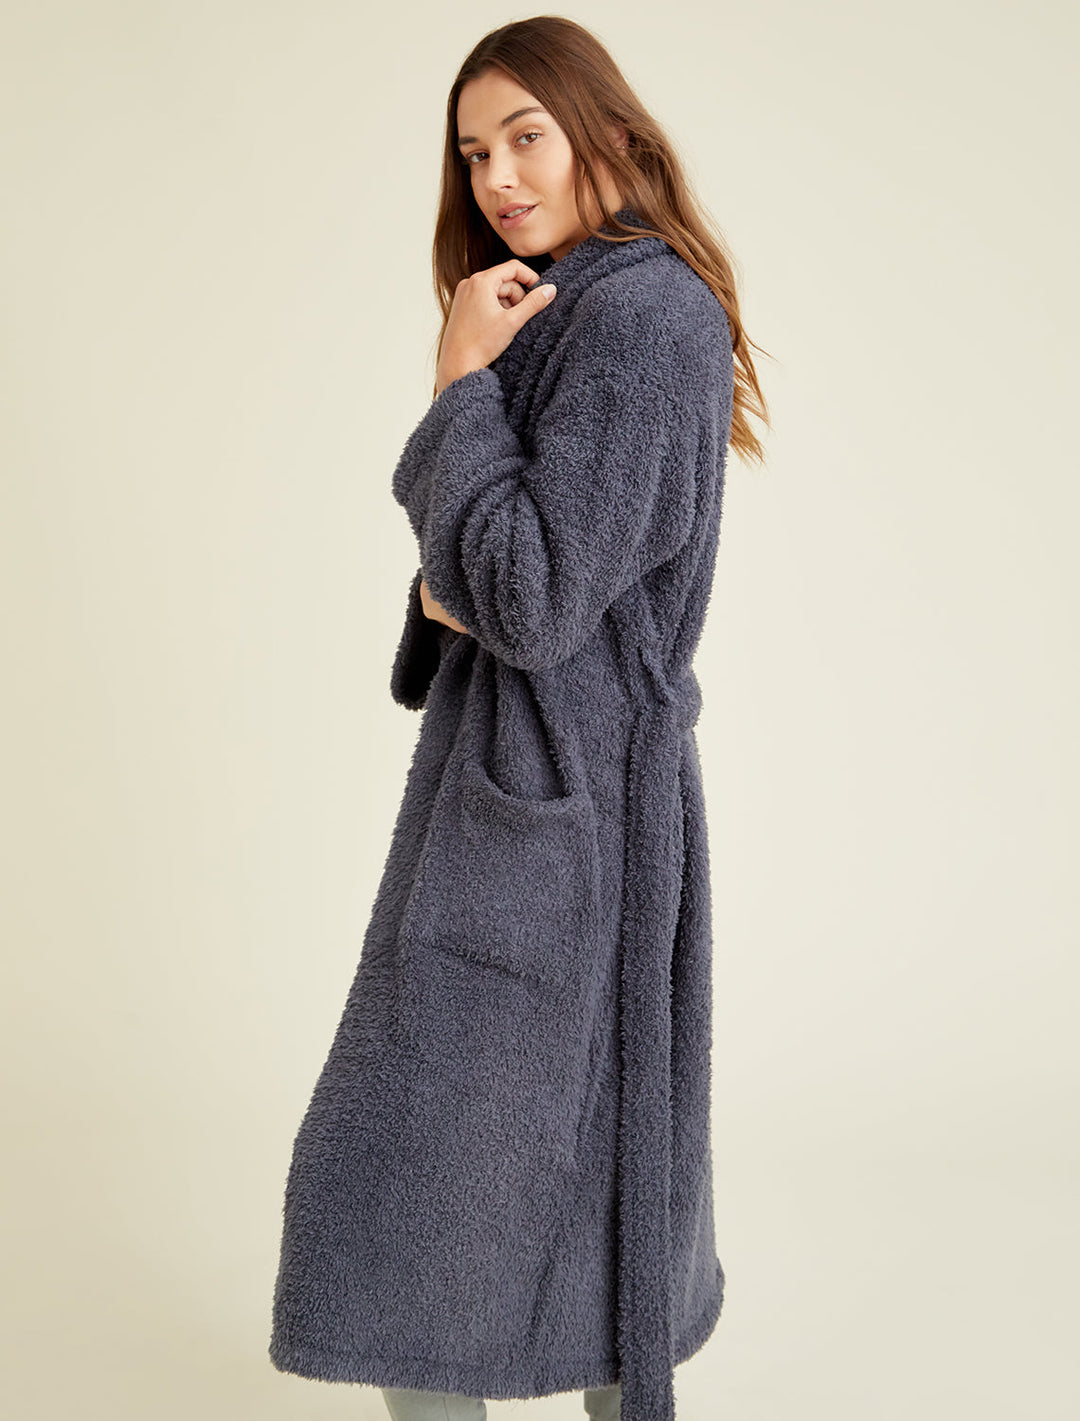 COZYCHIC ADULT ROBE-SLATE BLUE - Kingfisher Road - Online Boutique